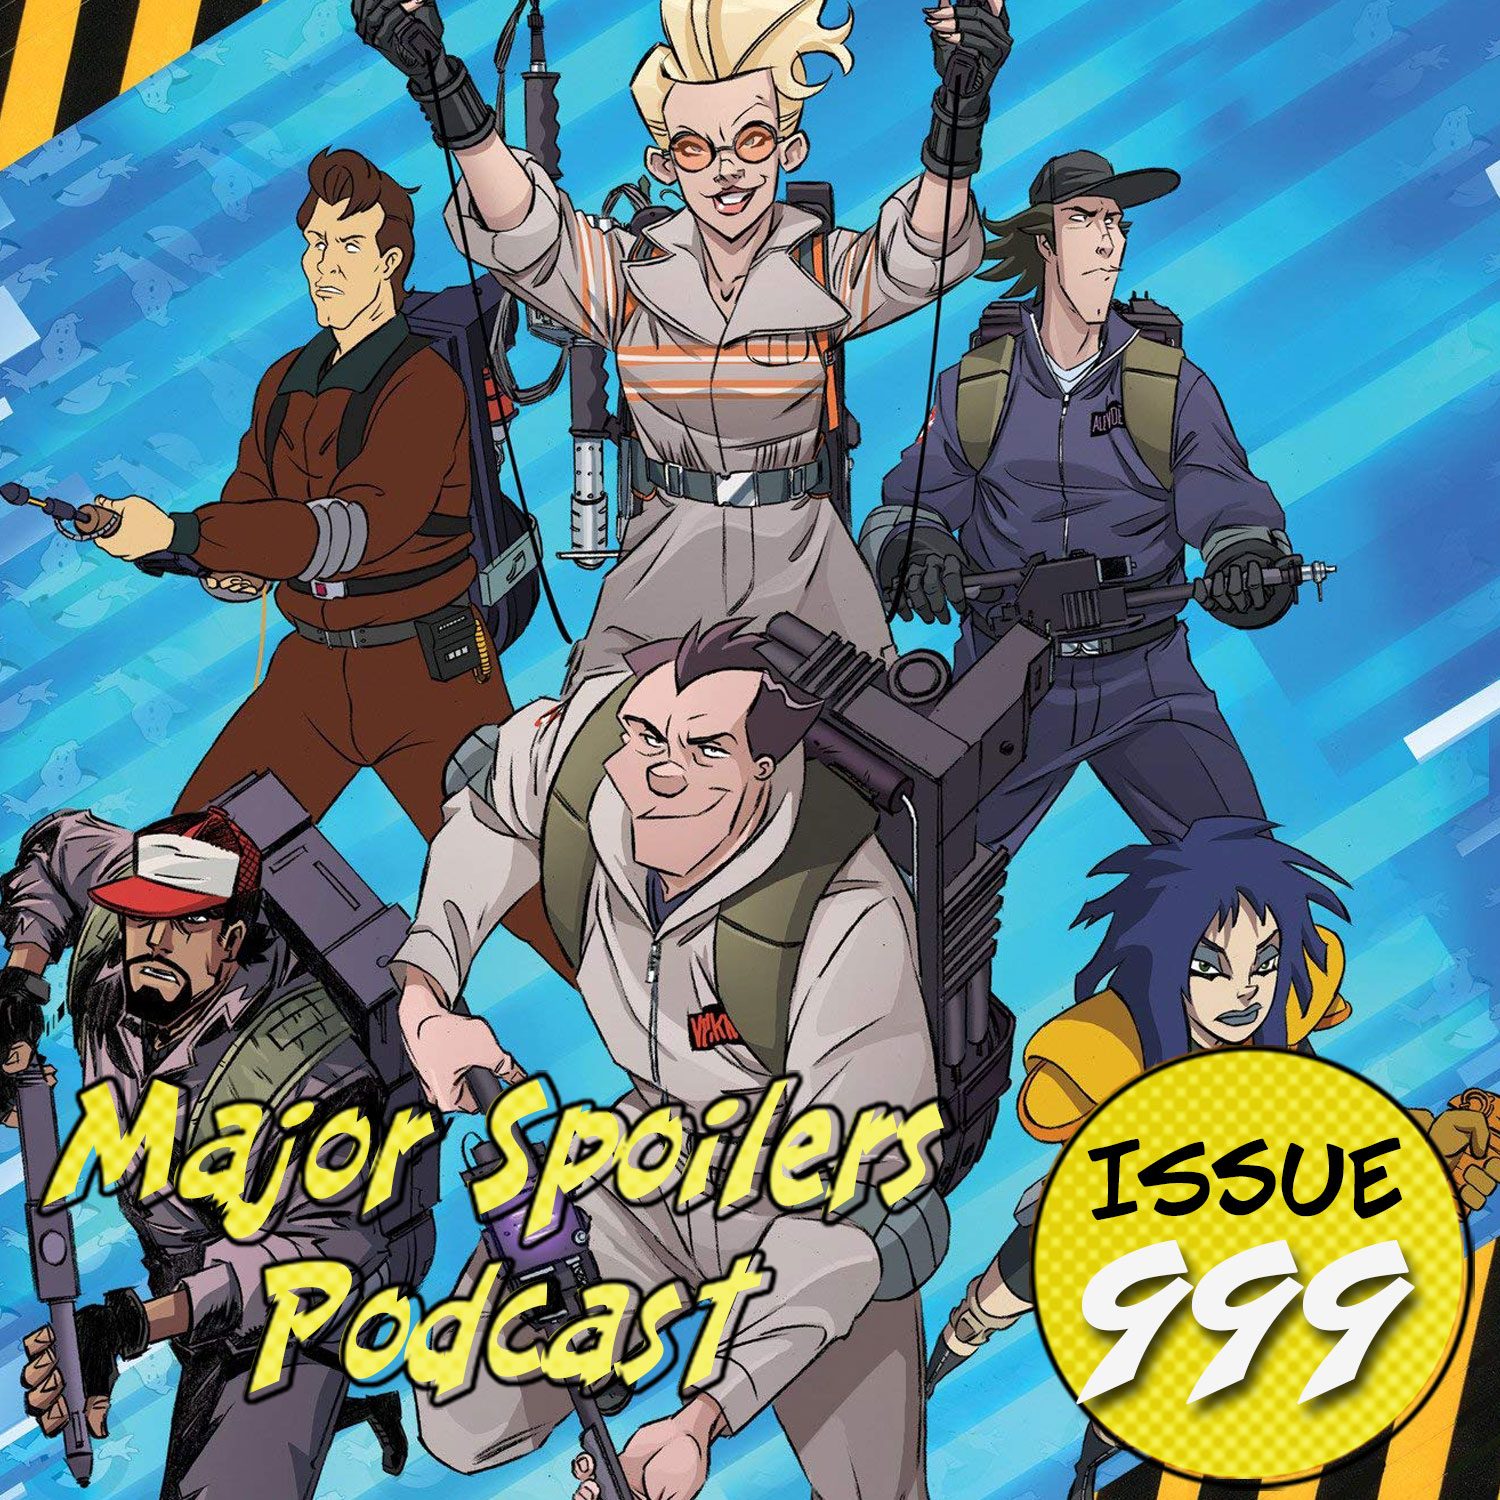 Major Spoilers Podcast #999: Ghostbusters Crossing Over